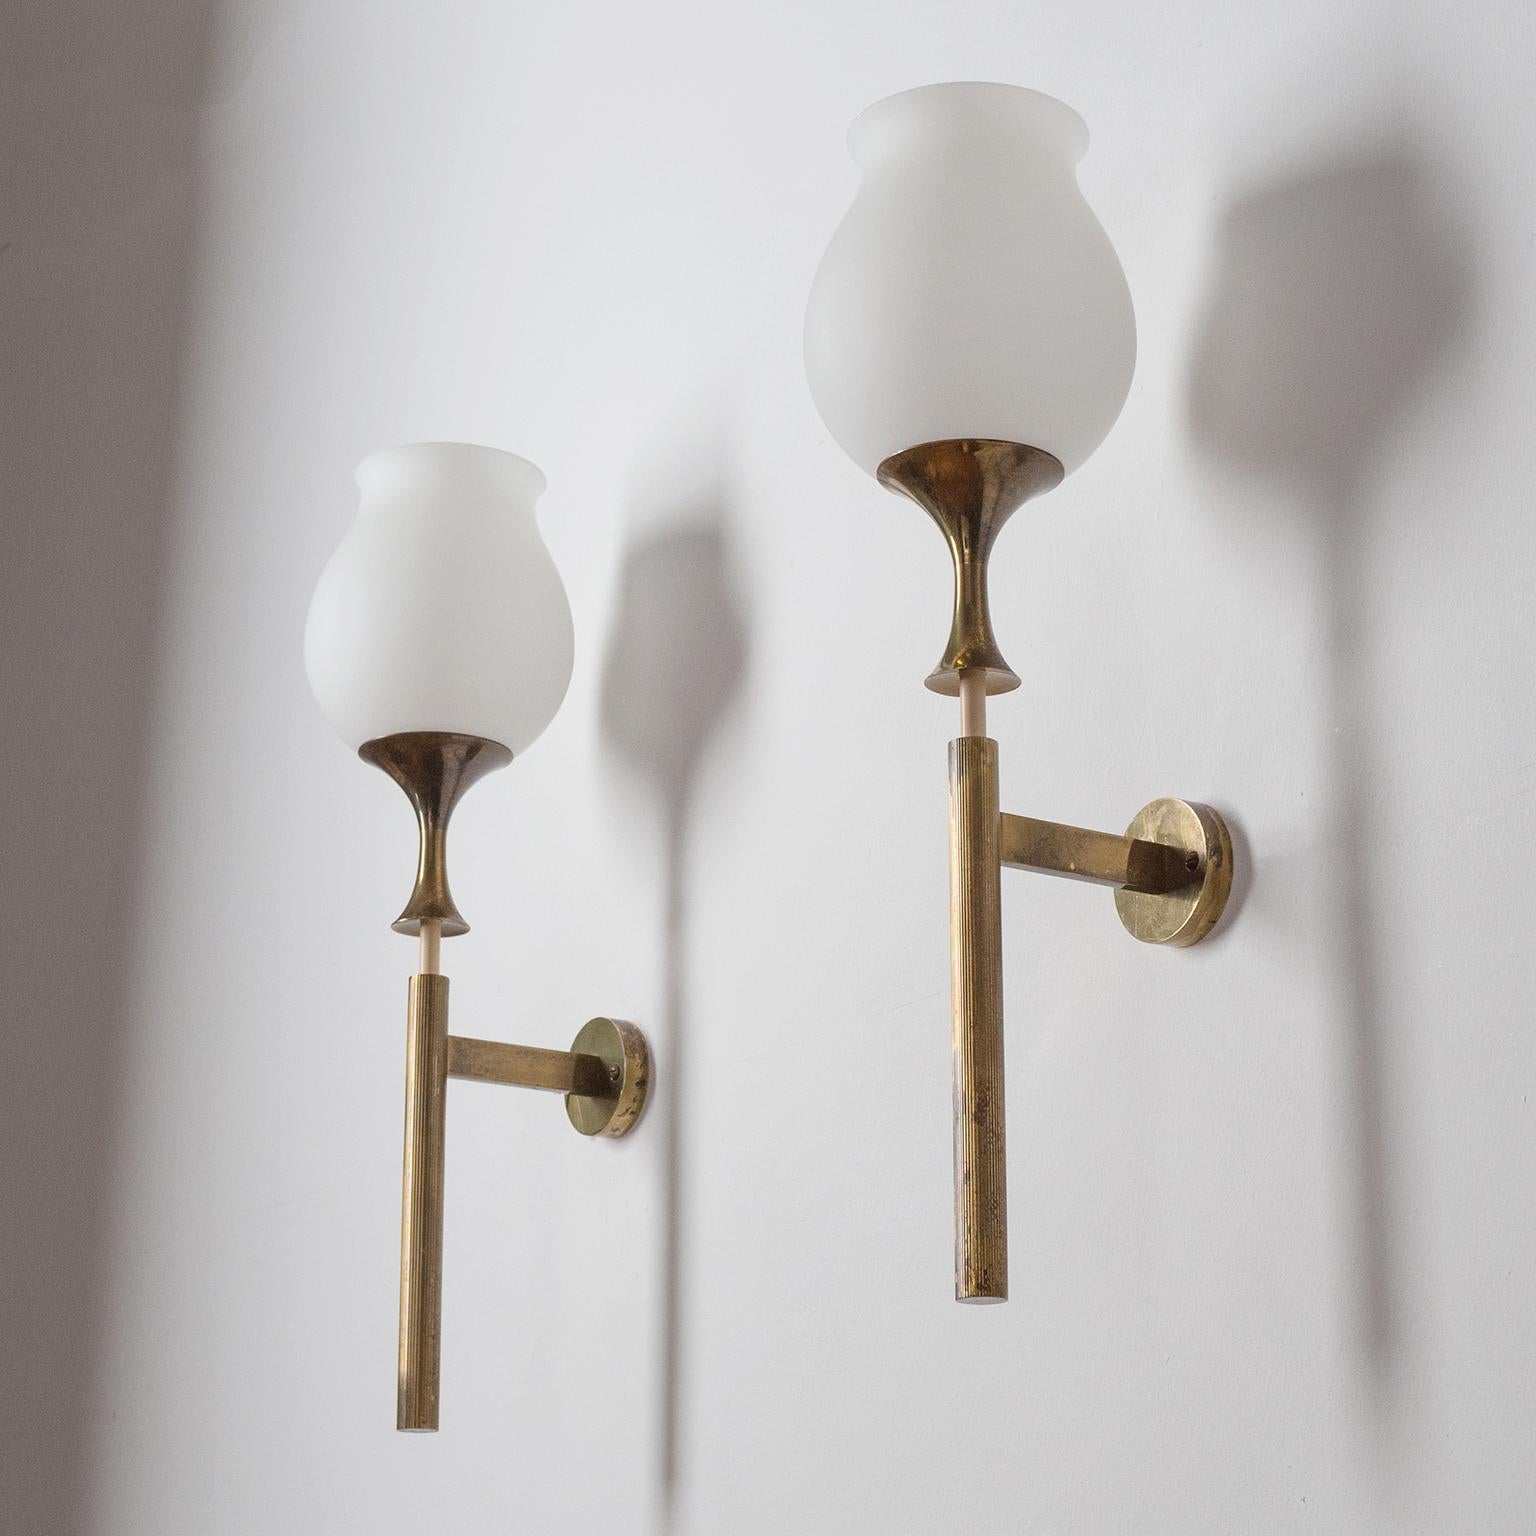 Rare pair of large modernist torch-style wall lights designed by Angelo Lelii for Arredoluce in 1956. All brass hardware with sensuous tulip-shaped blown satin glass diffusers. Nice original condition with patina on the brass. One original brass and